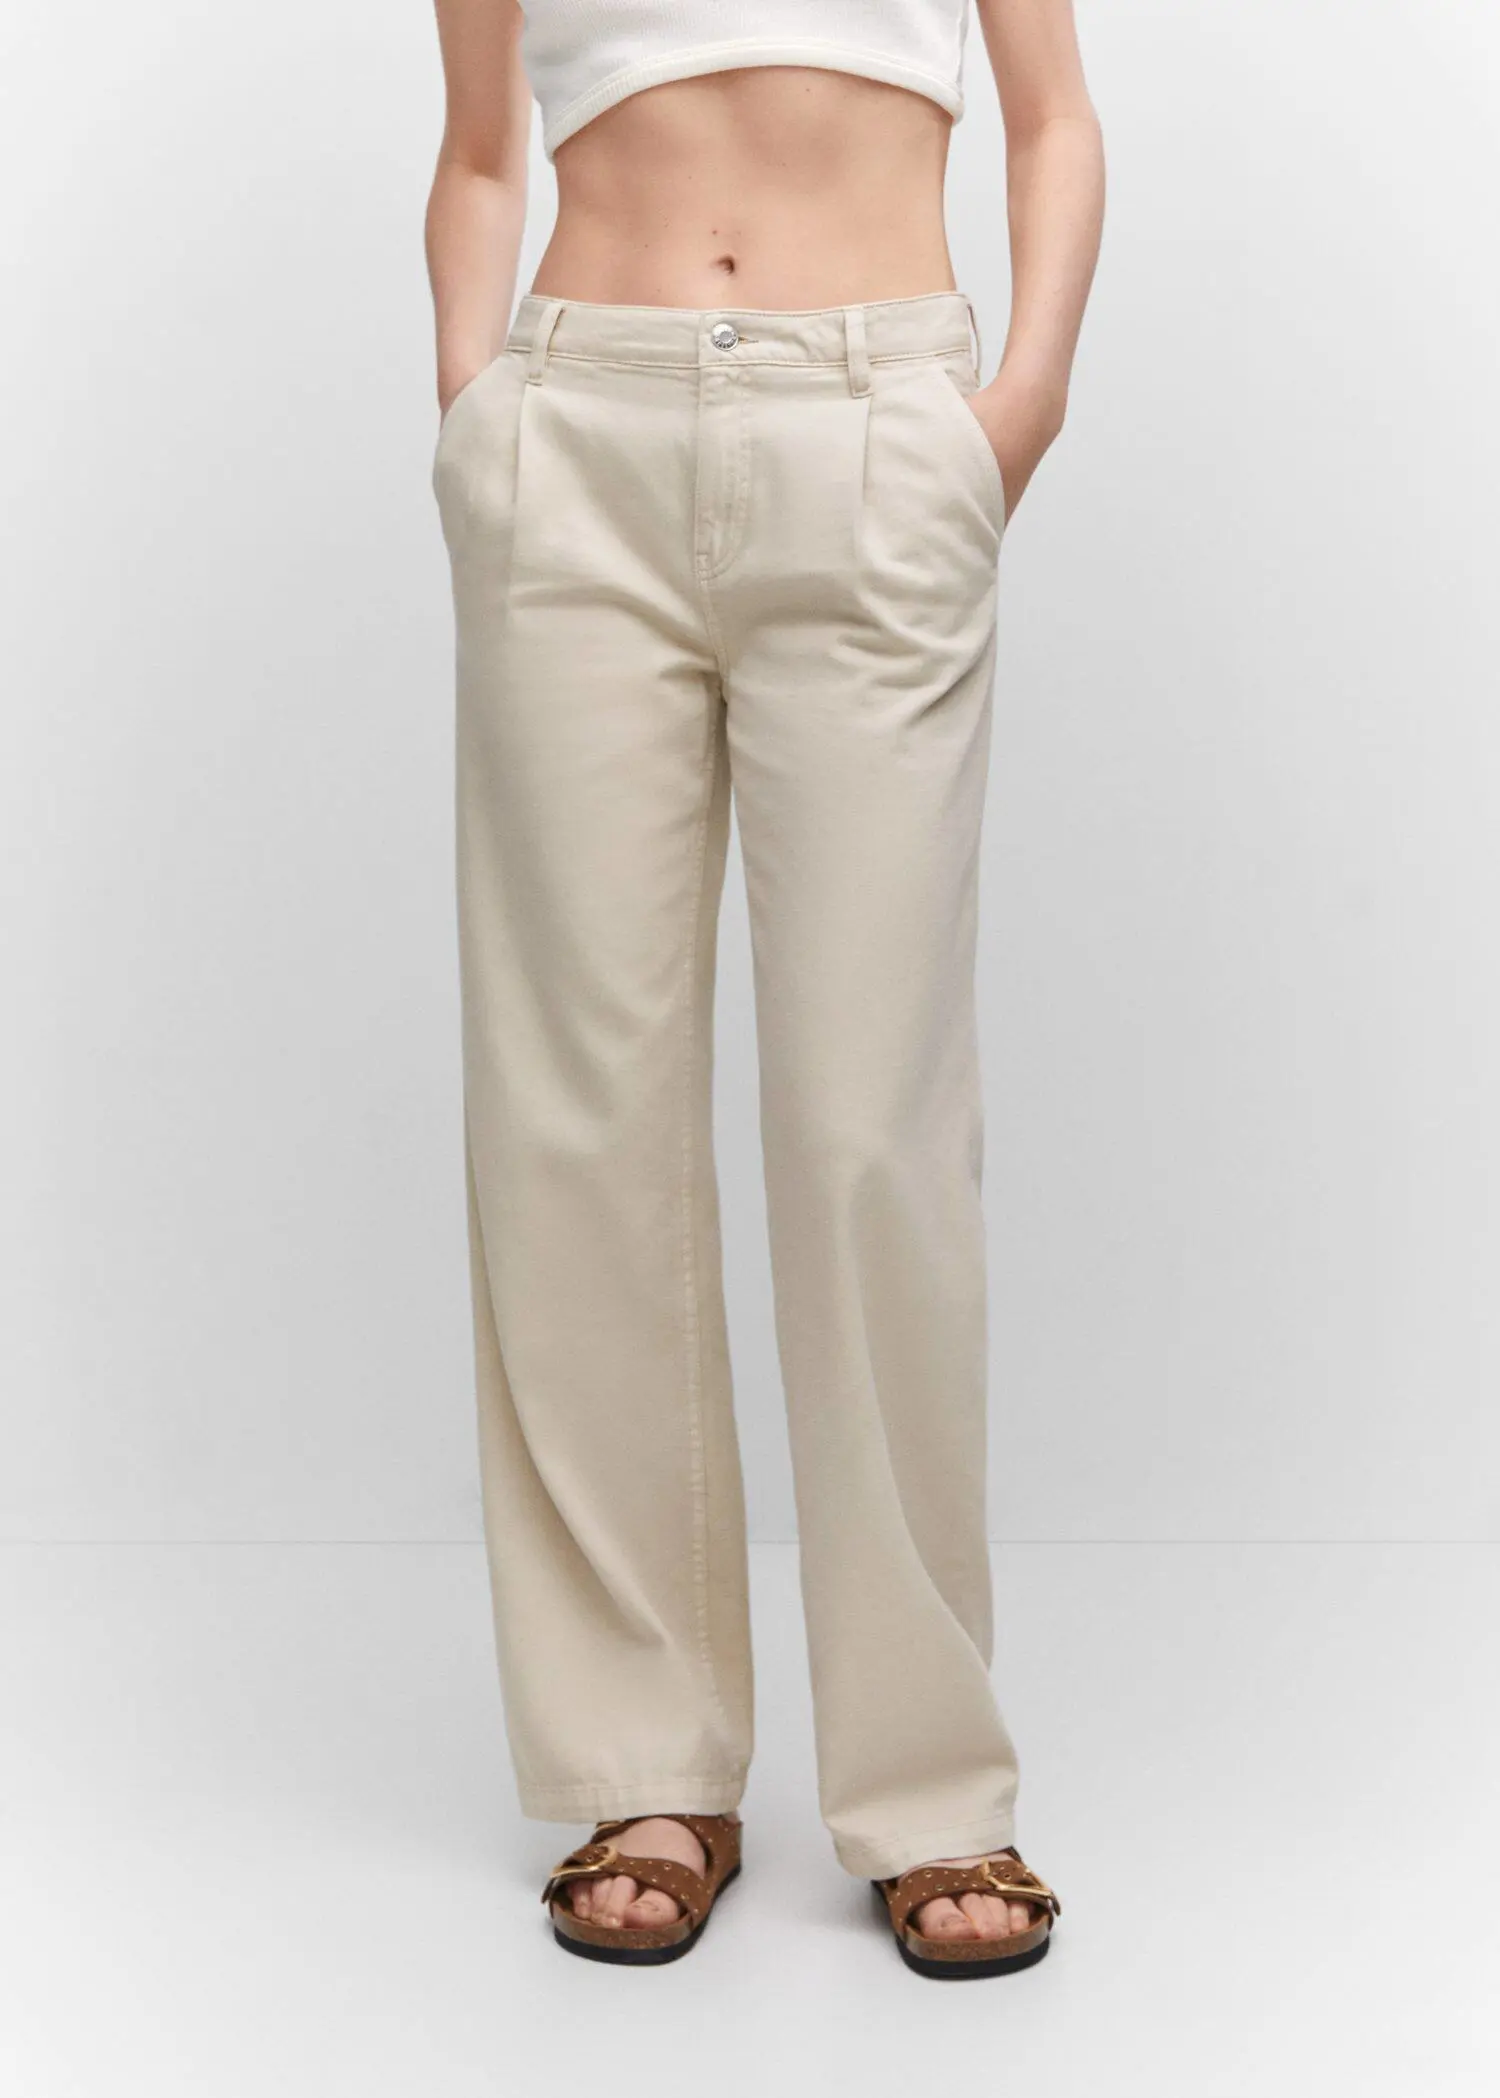 Mango Straight pleated jeans. a pair of pants that are on a person. 